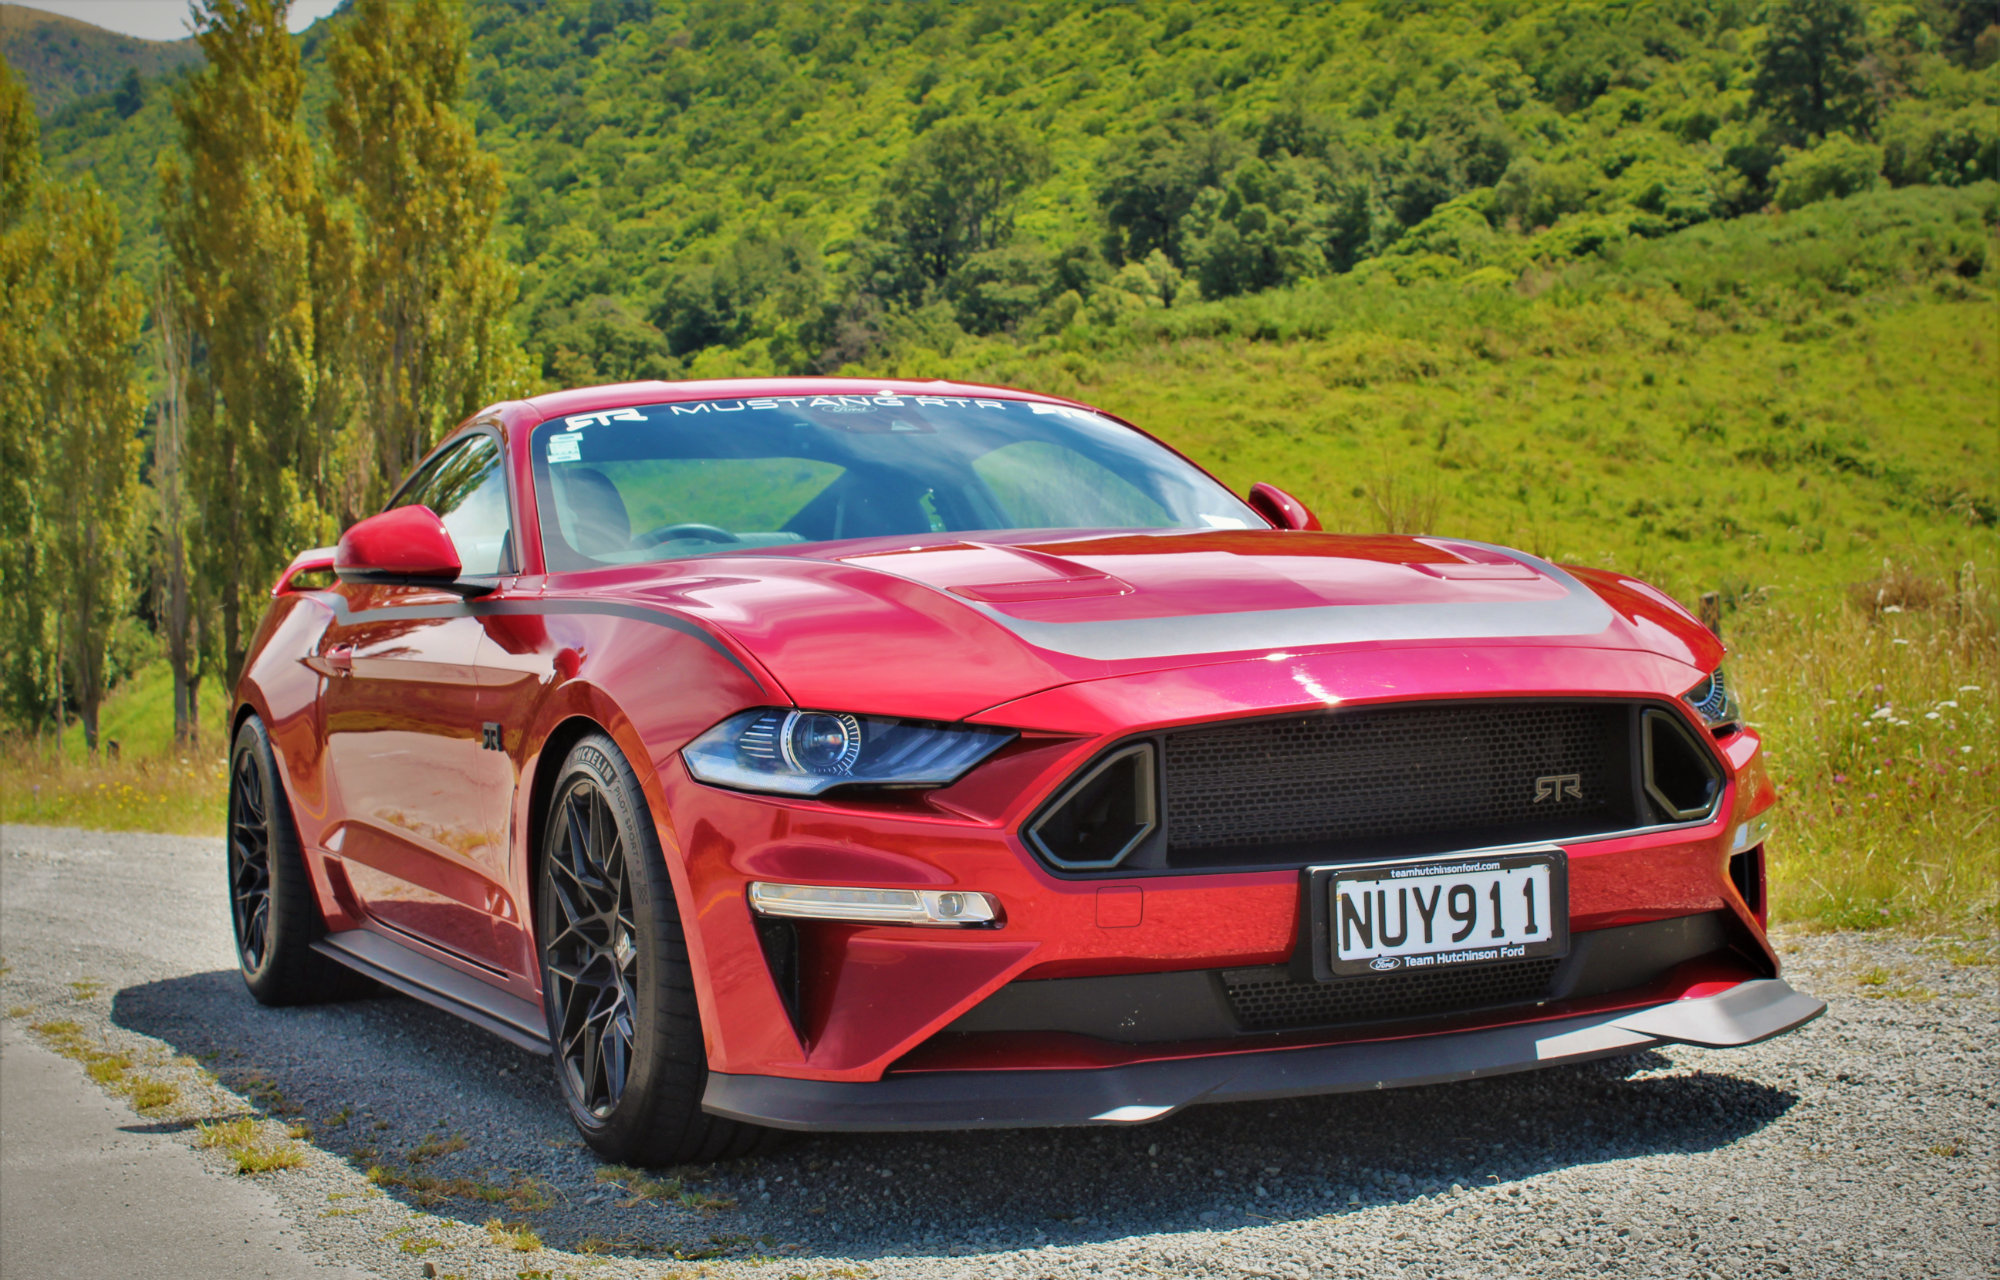 RTR Series 2 Mustang in Christchurch